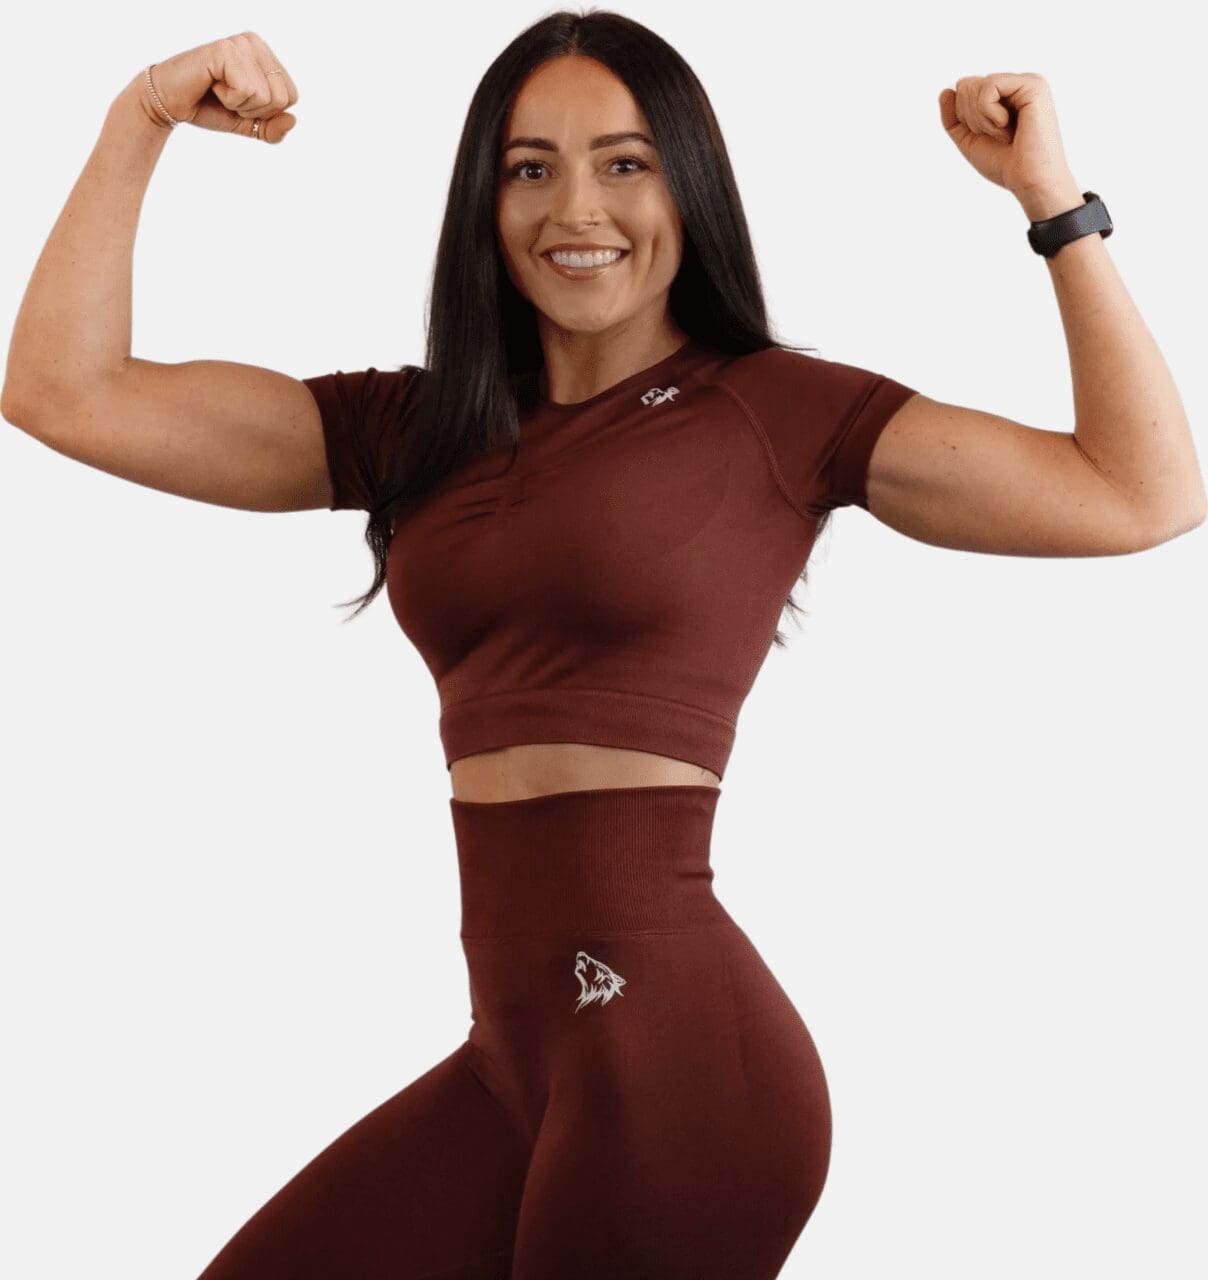 A woman in maroon outfit flexing her muscles.